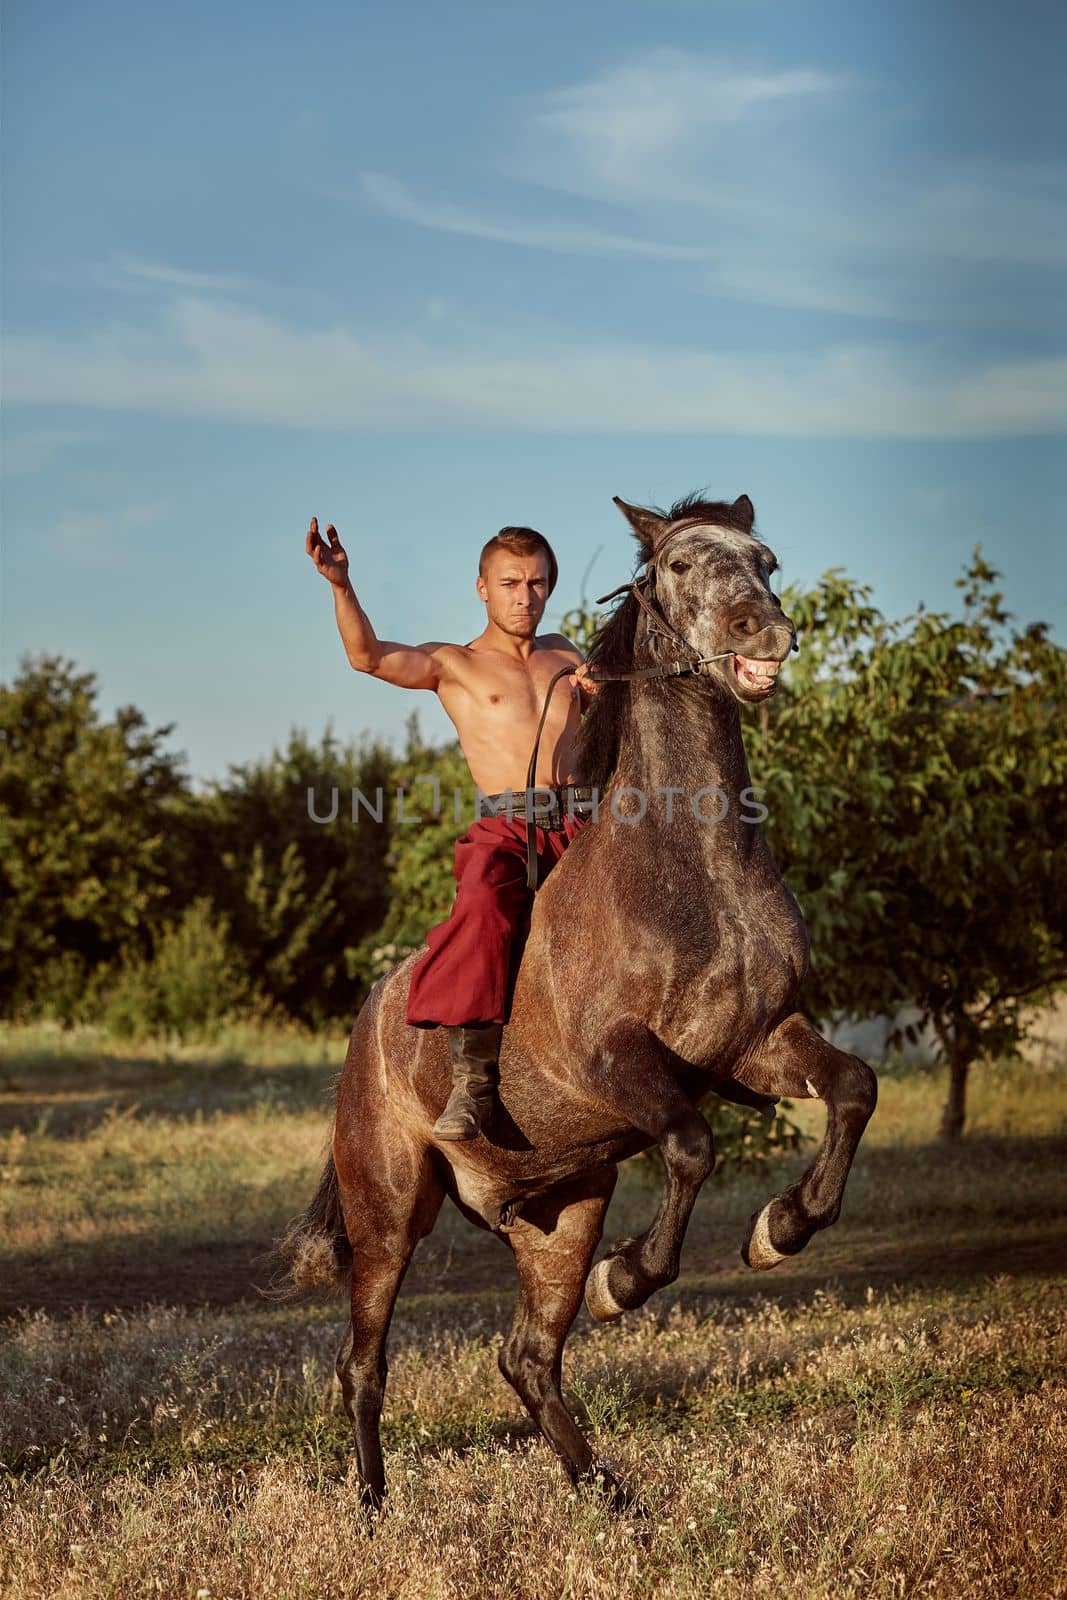 Handsome man cowboy riding on a horse - background of sky and trees by nazarovsergey